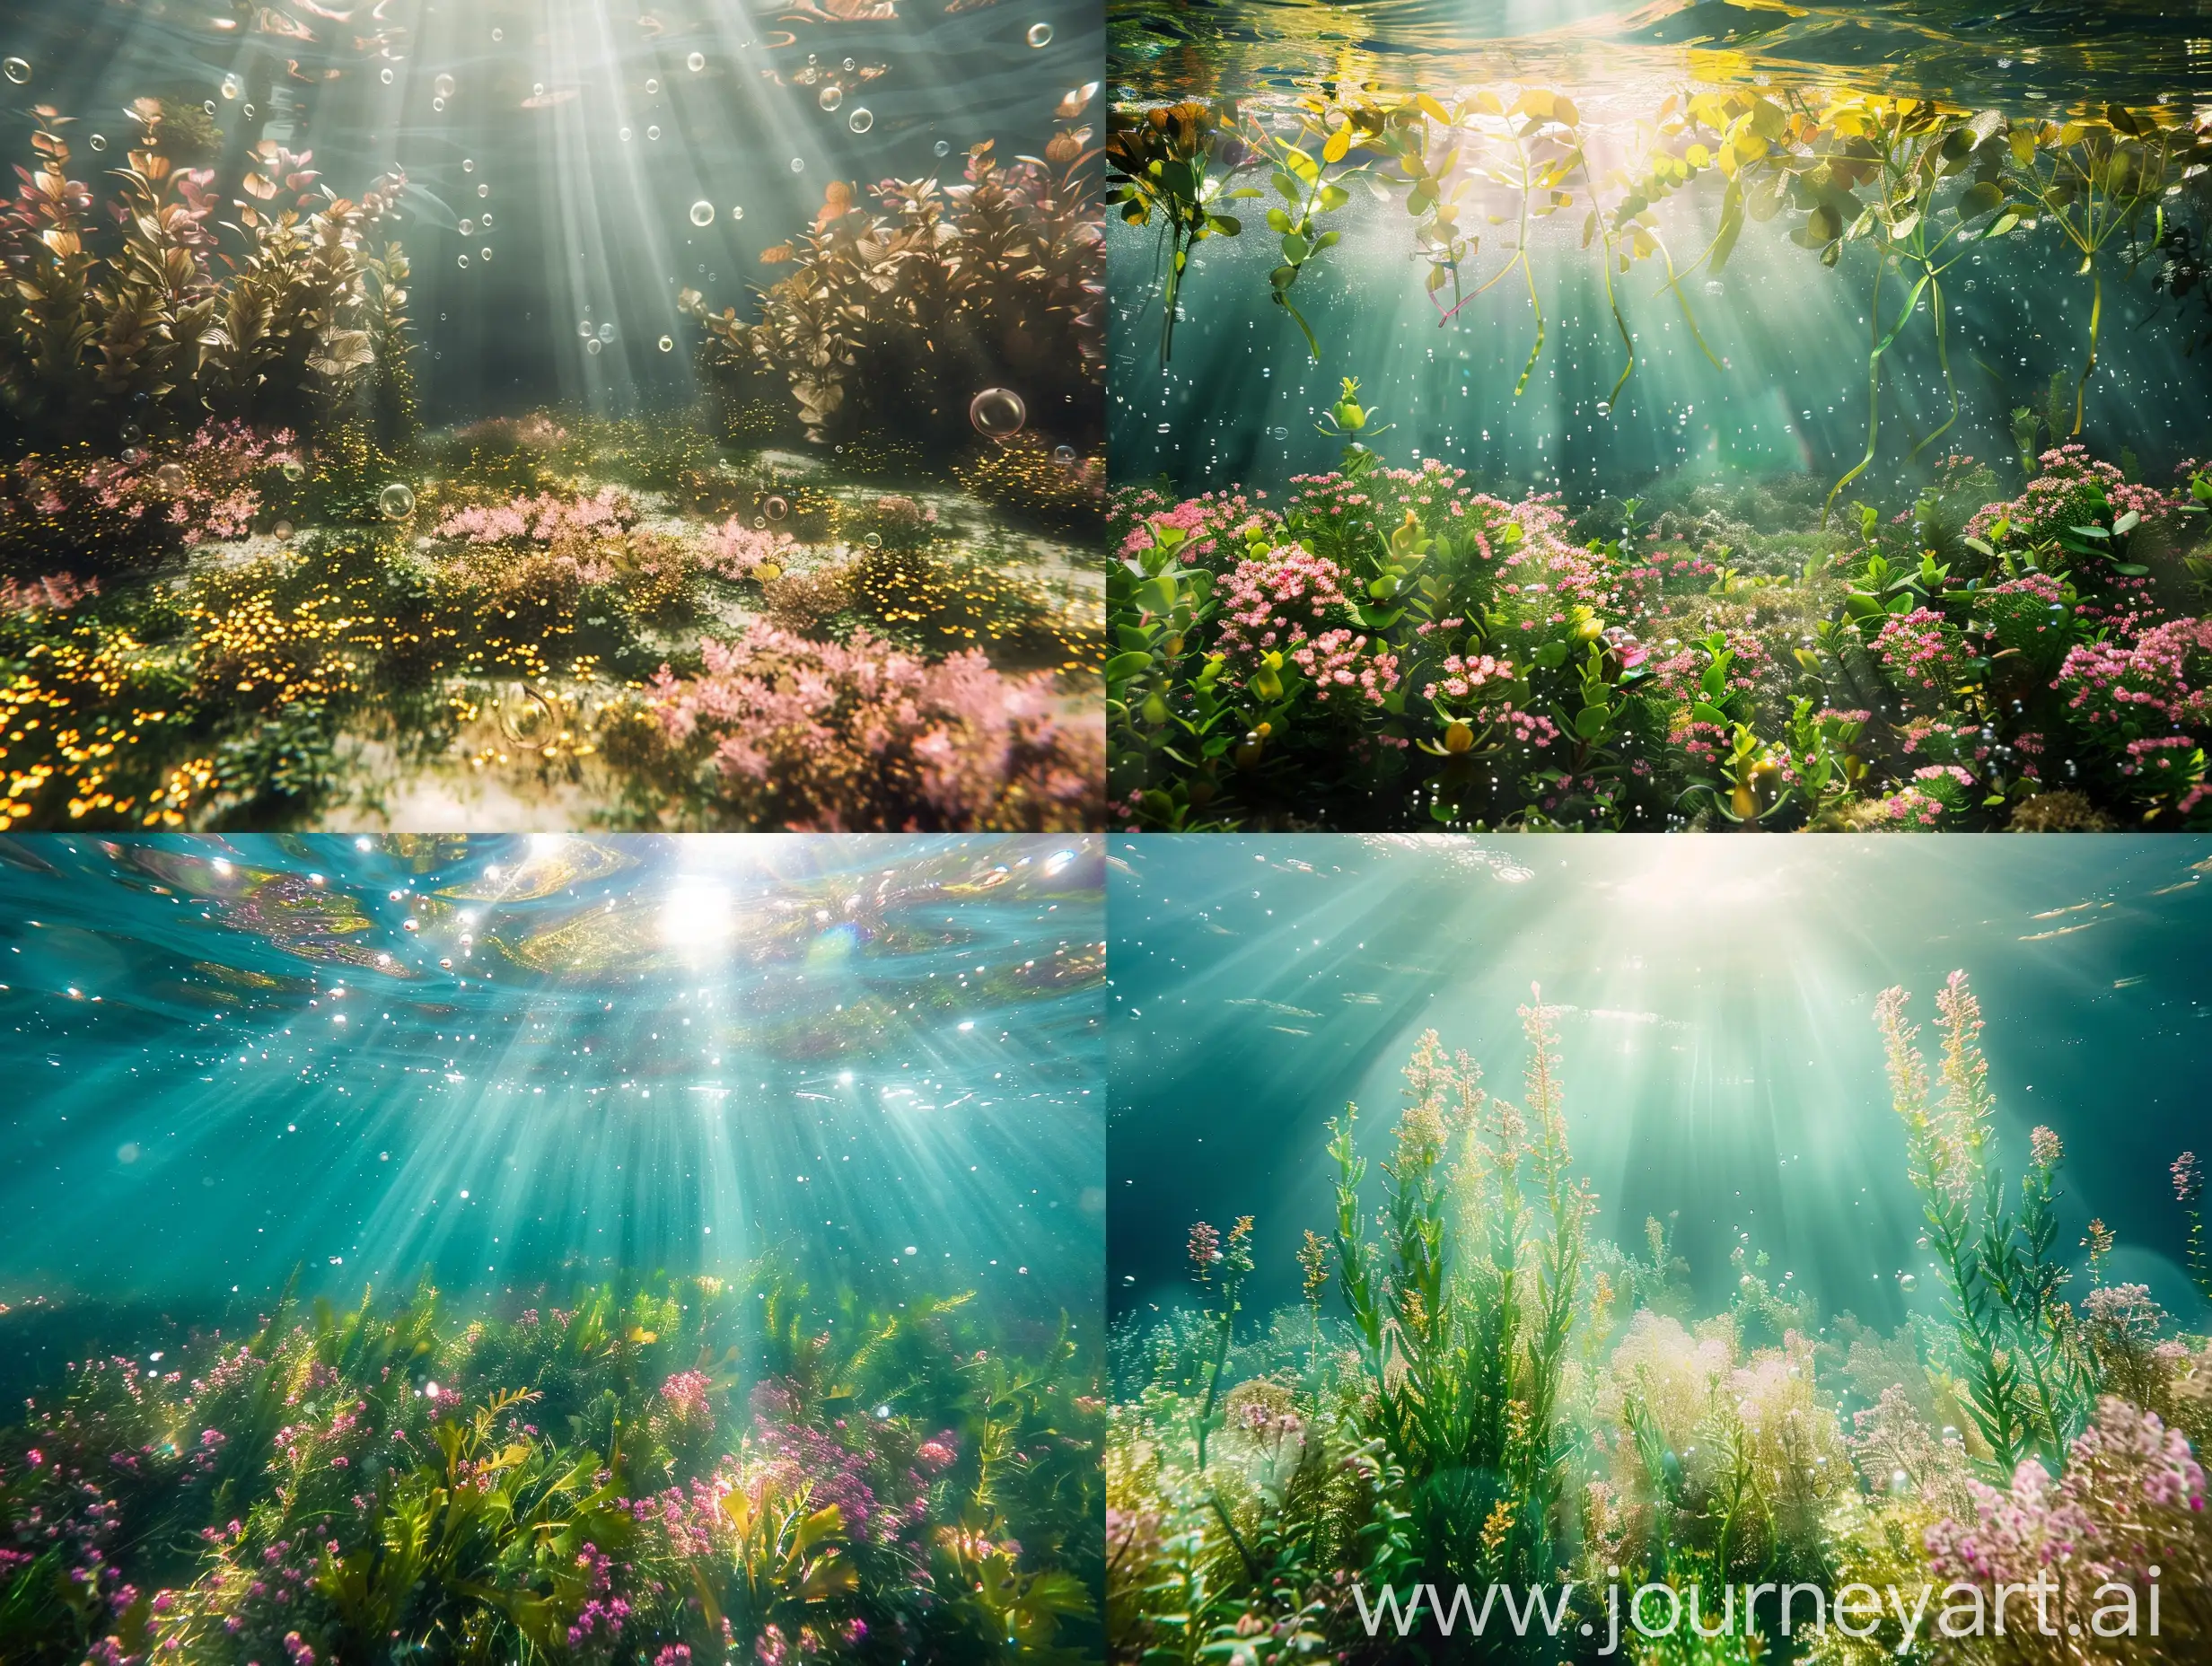 Under the water at the bottom of the ocean, where there are green, pink and gold herbs and some bubbles, the sun's rays sneak in to illuminate the ocean floor.